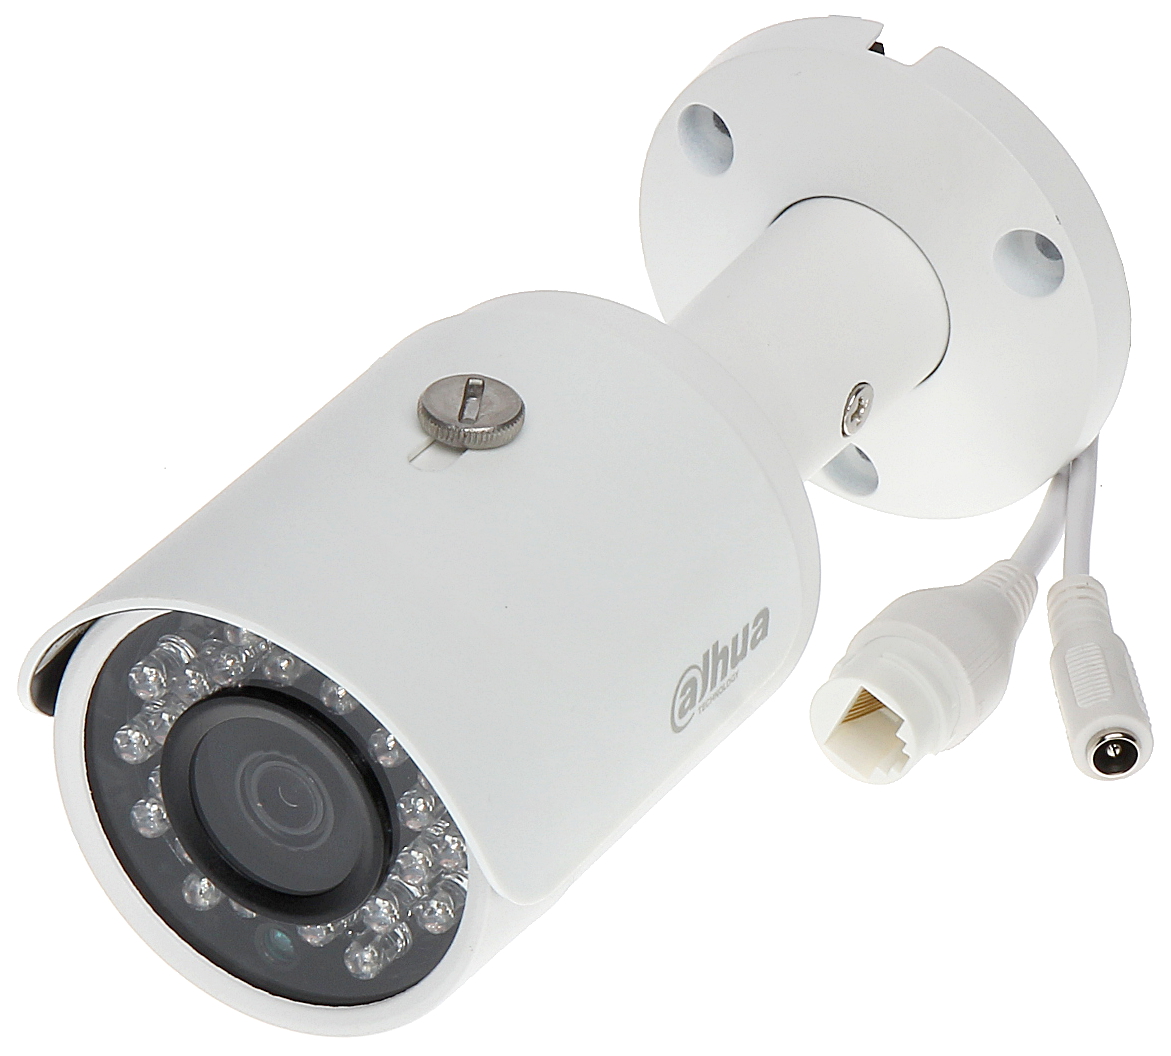 IP CAMERA DH-IPC-HFW1320SP-028 0B 3.1 Mpx 2.8 mm DAHUA - IP Cameras with  Fixed-Focal Lens and Ifra-Red Illumina... - Delta